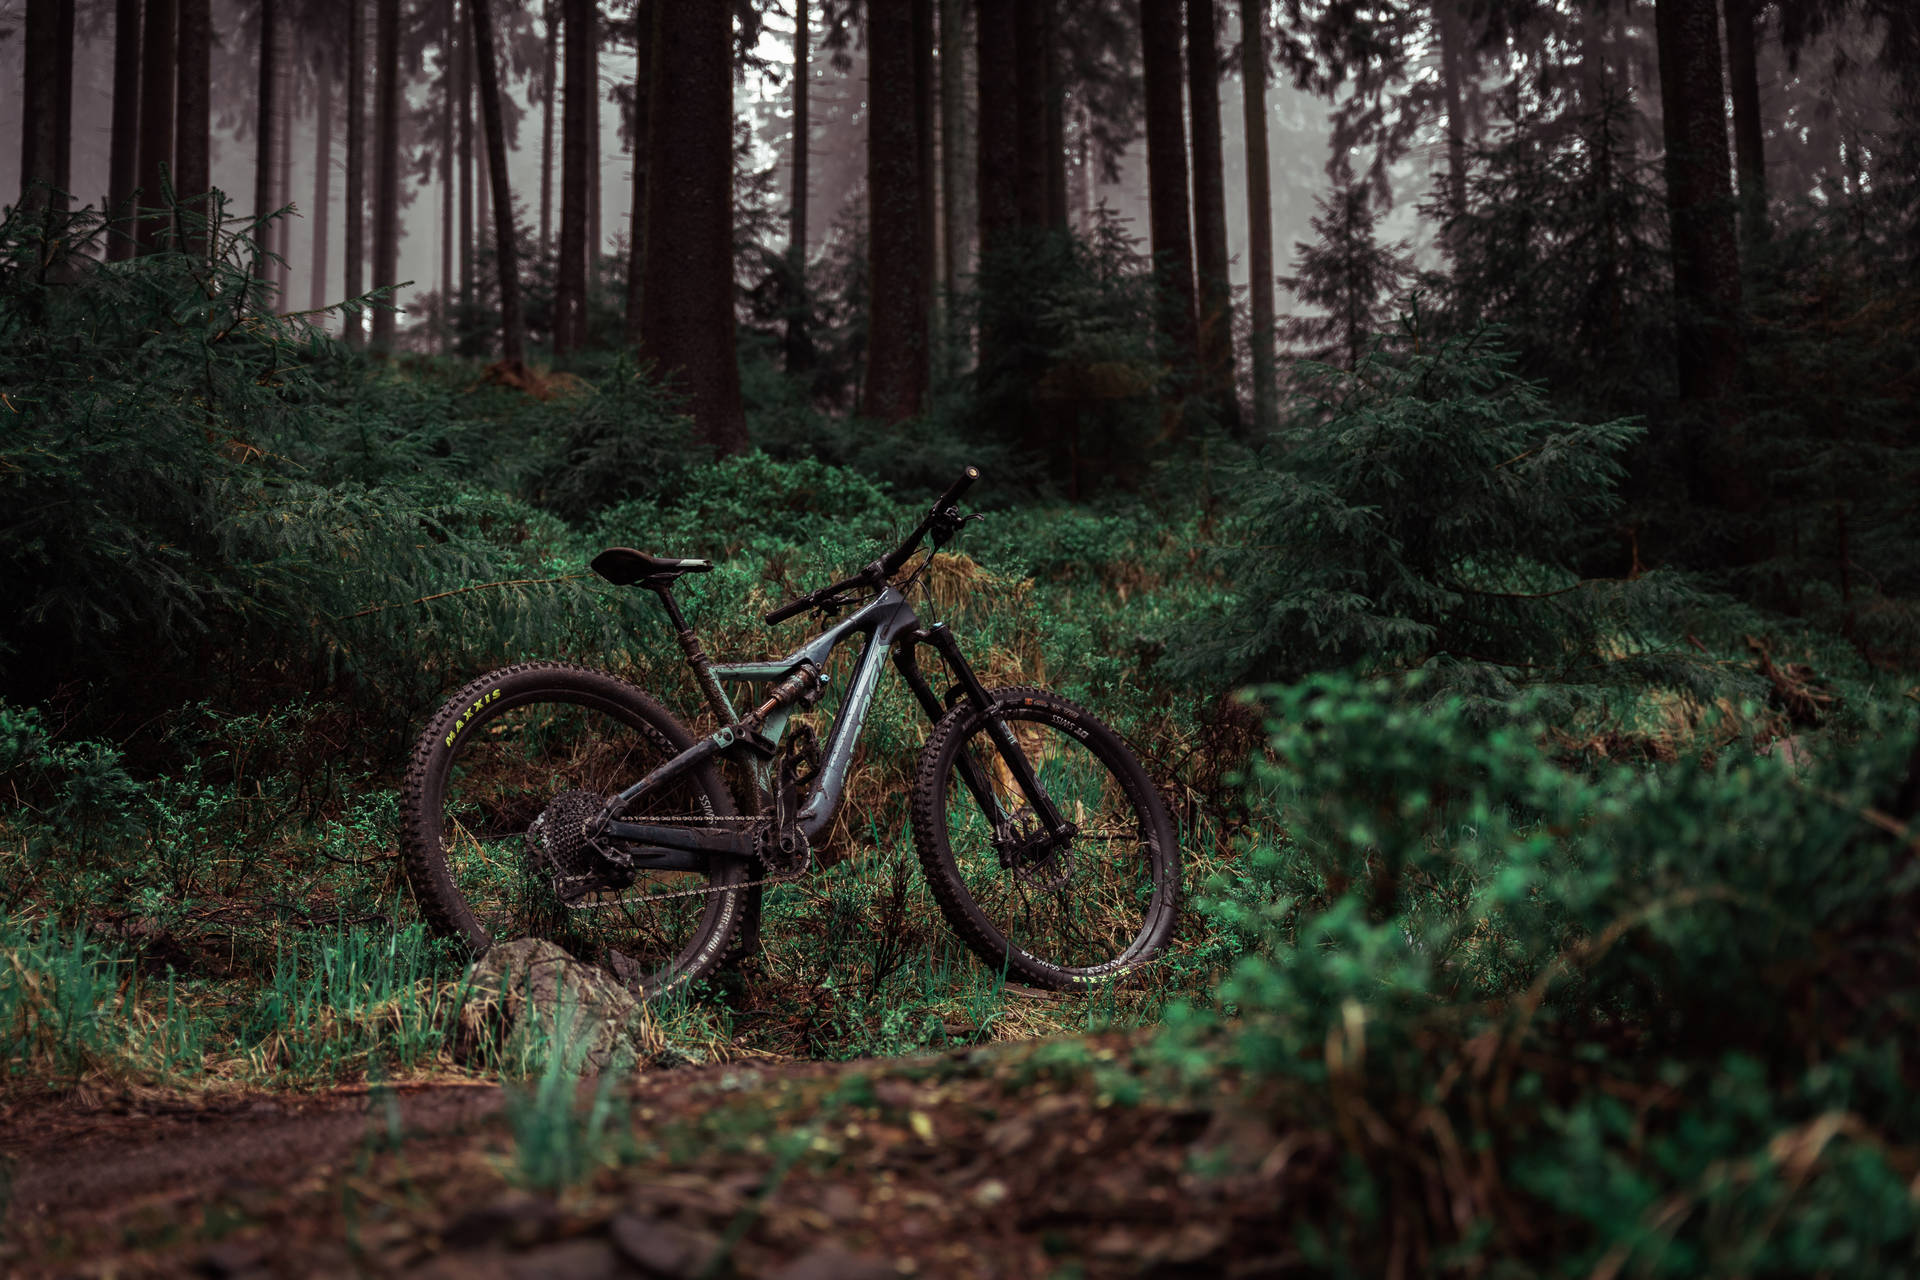 Mountain Bike 5836X3891 Wallpaper and Background Image